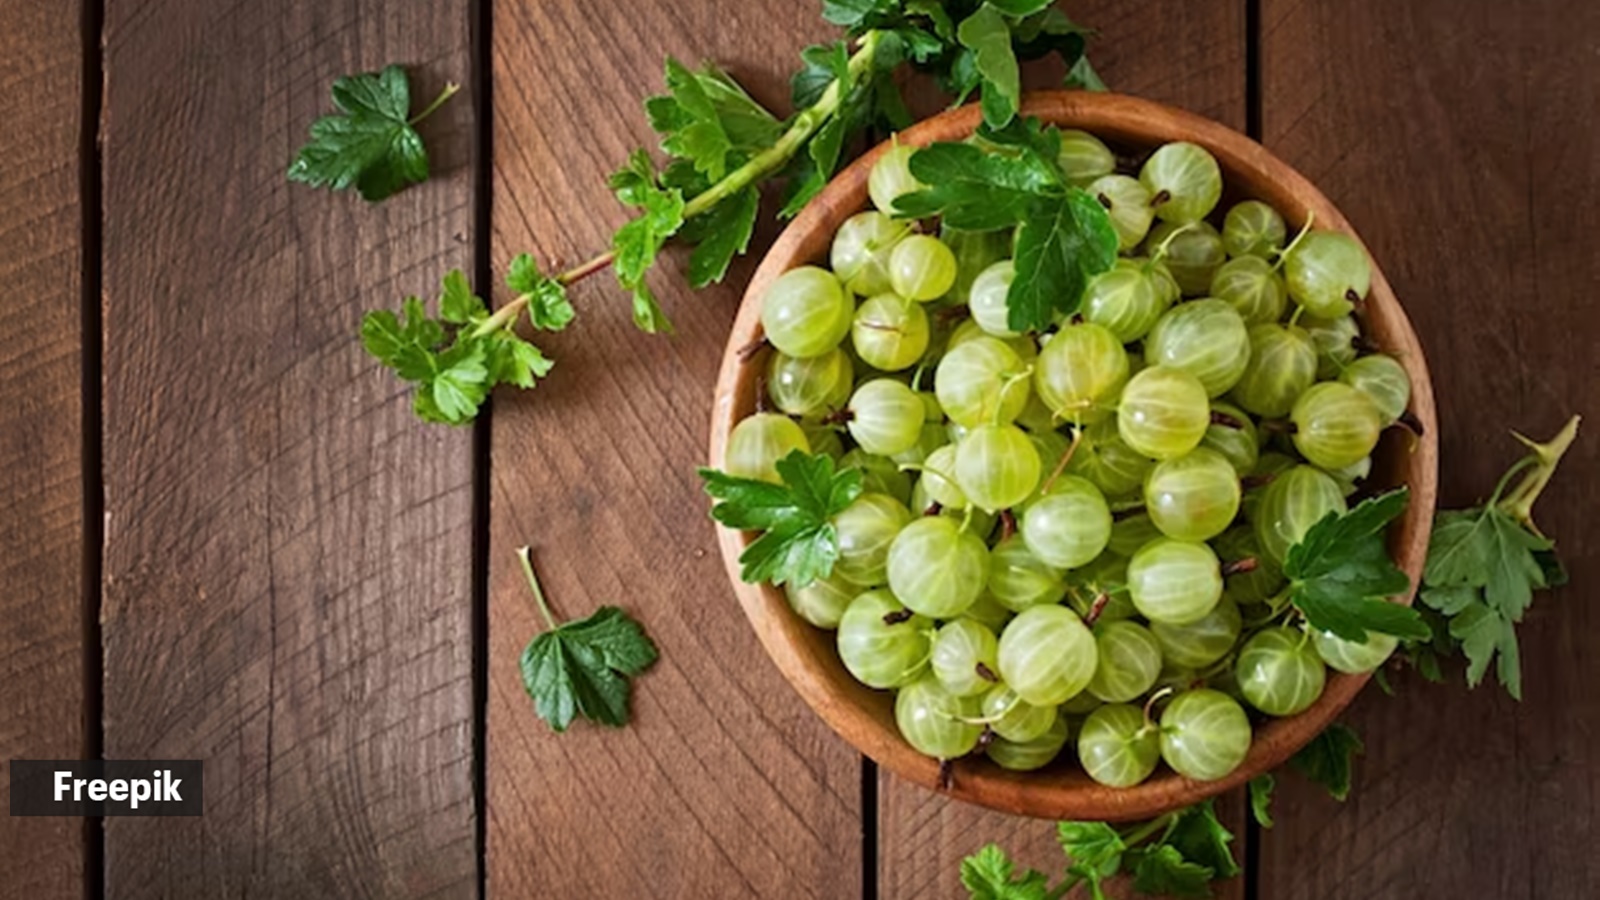 Page 4 | gooseberries 1080P, 2K, 4K, 5K HD wallpapers free download, sort  by relevance | Wallpaper Flare